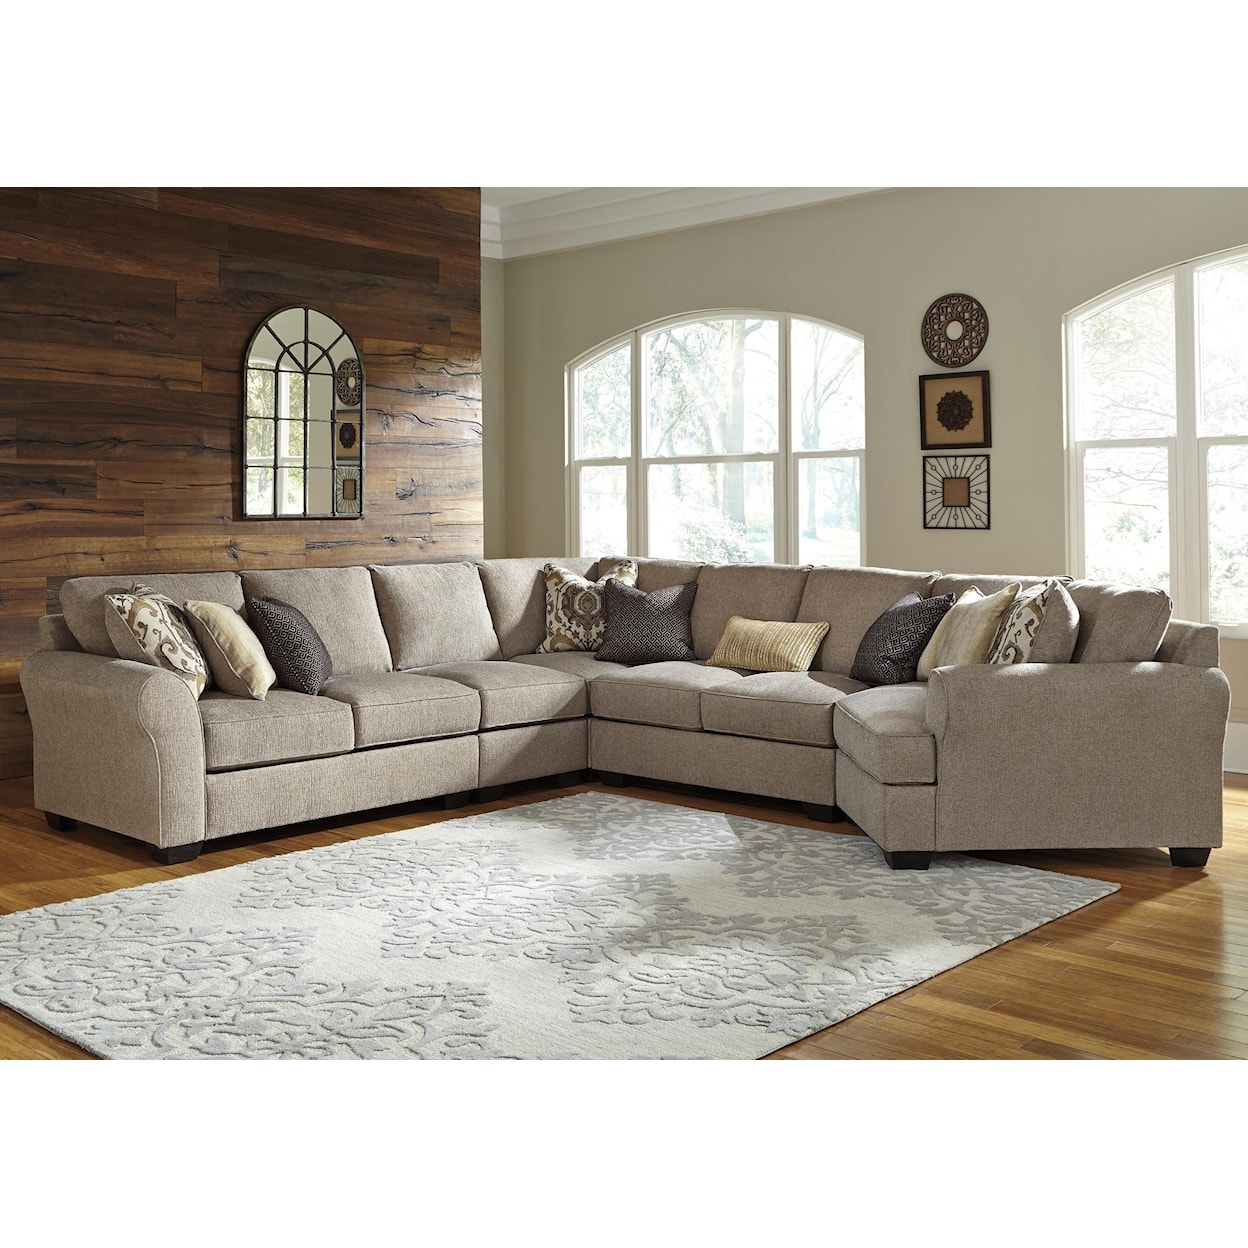 JB King Pantomine 5-Piece Sectional with Cuddler